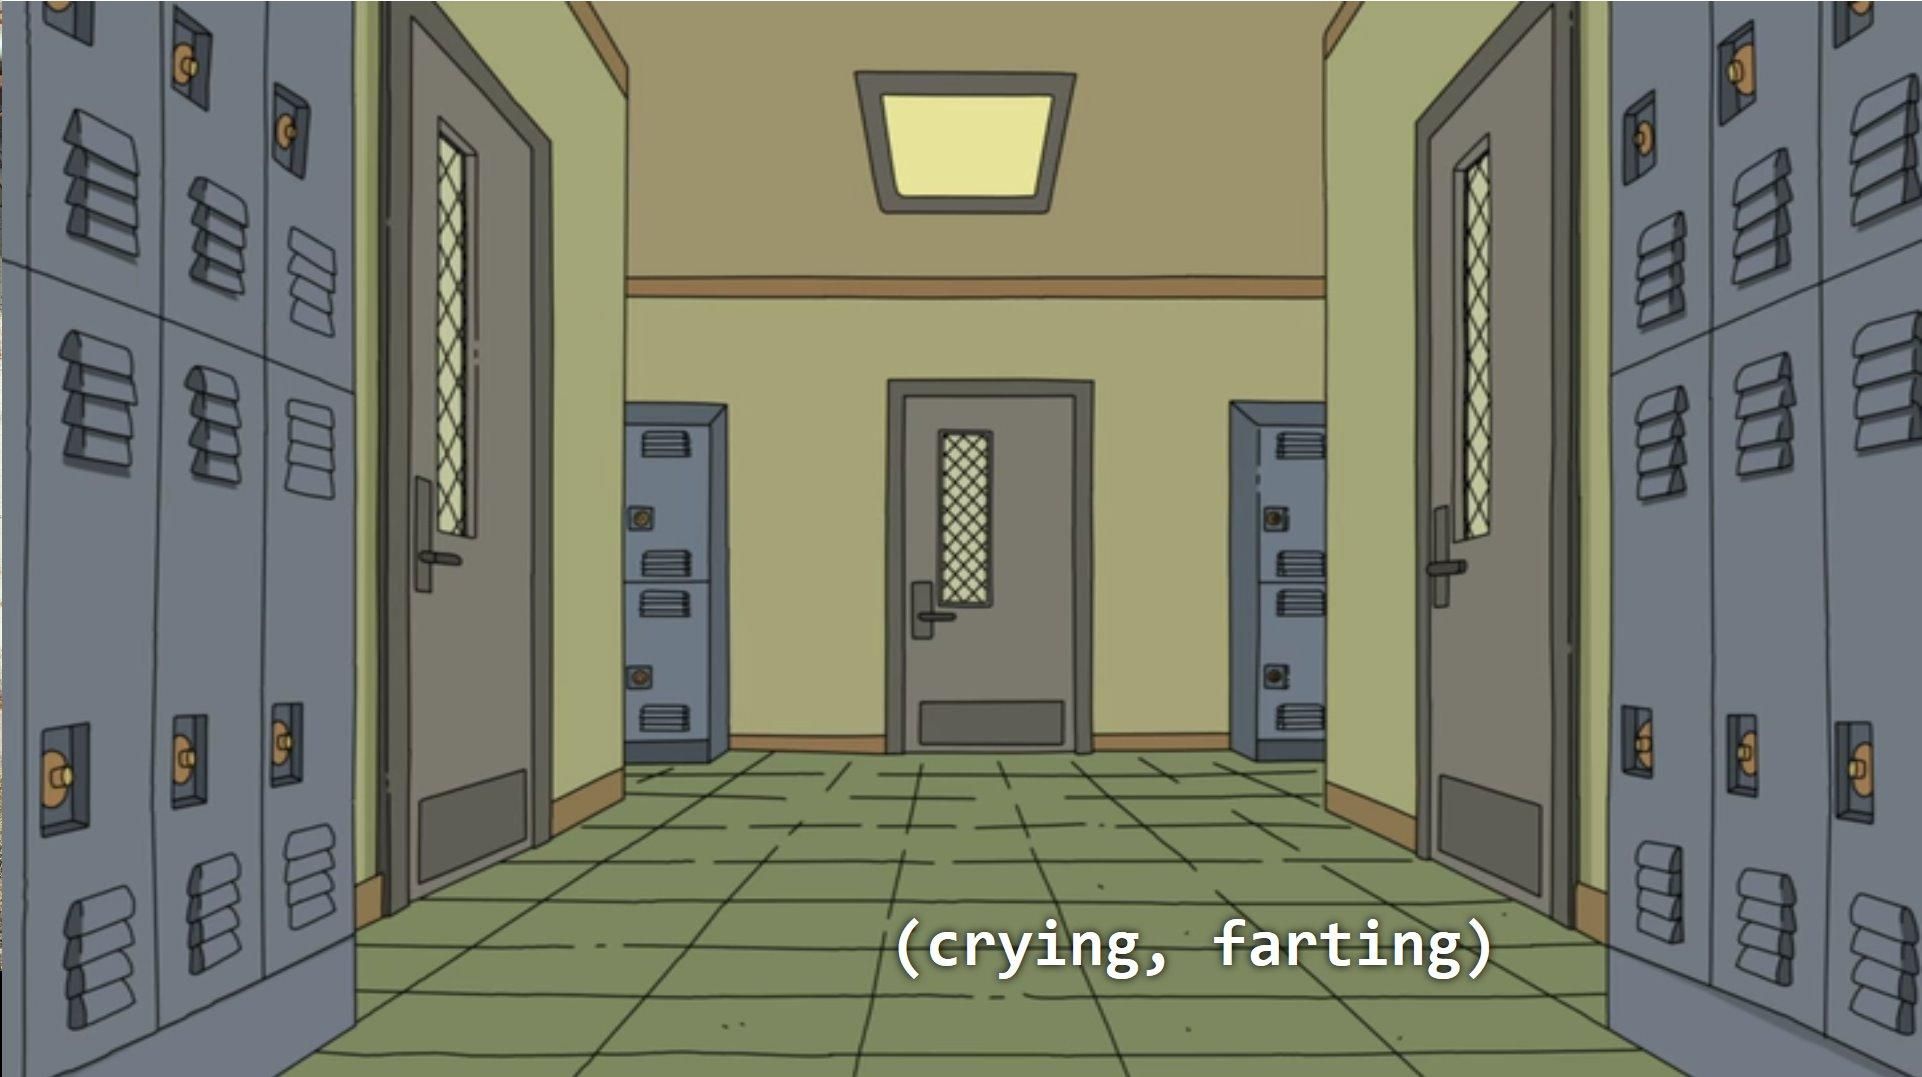 Only recently discovered Bob's Burgers, but this subtitle hits home with me.